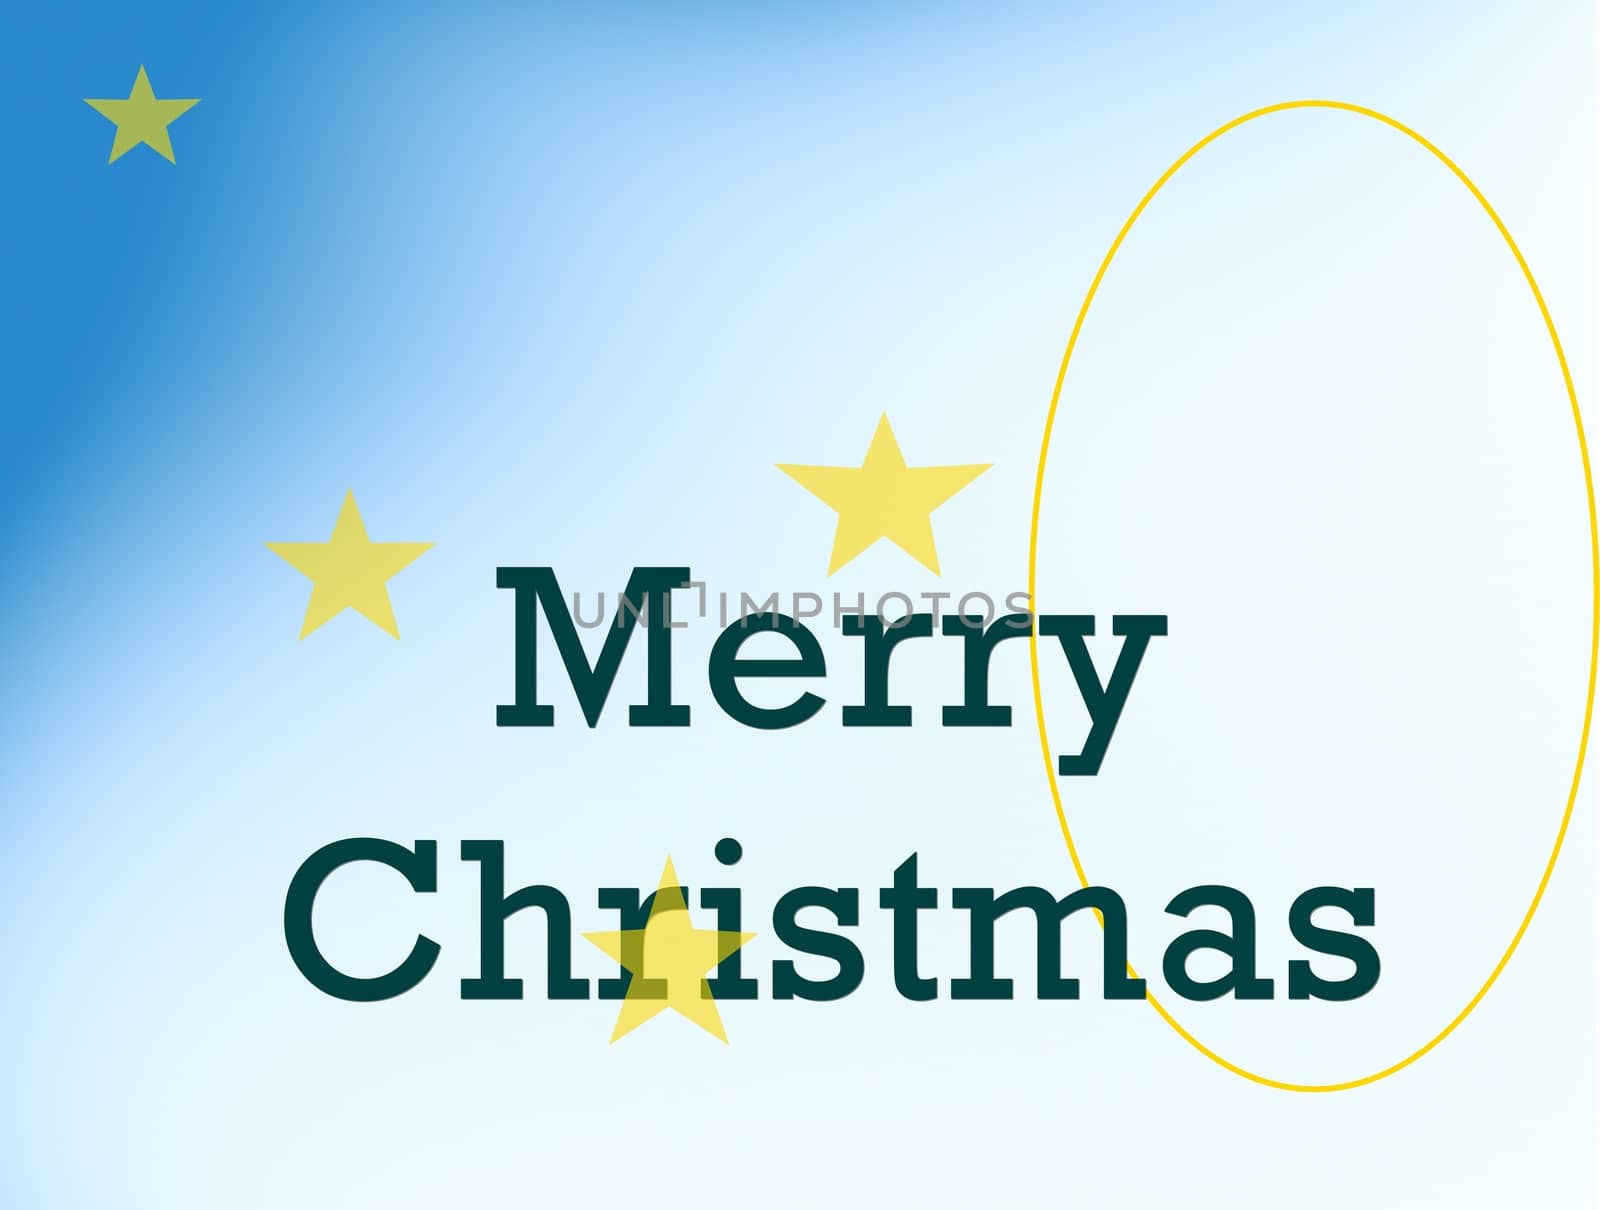 Merry Christmas card on blue white gradient background by nehru